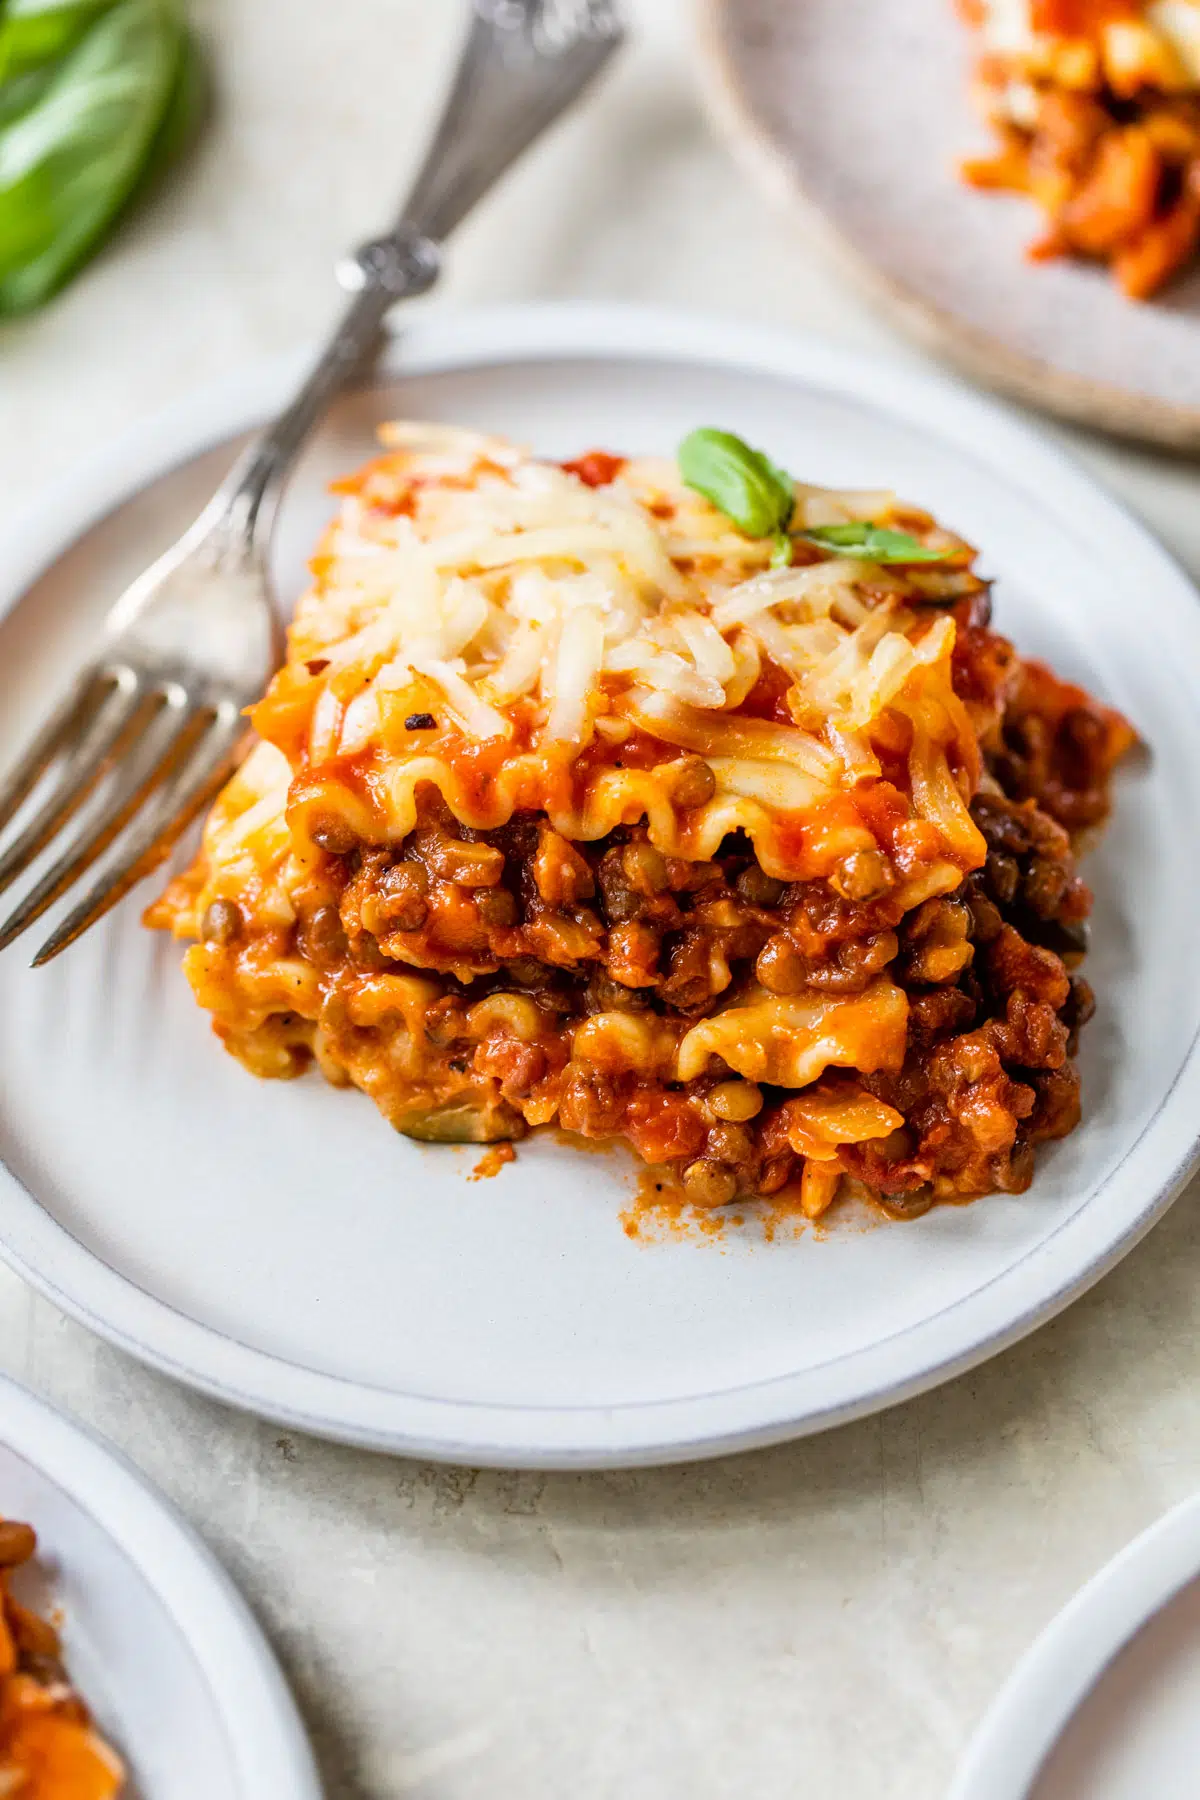 a piece of lasagna on a plate with a fork